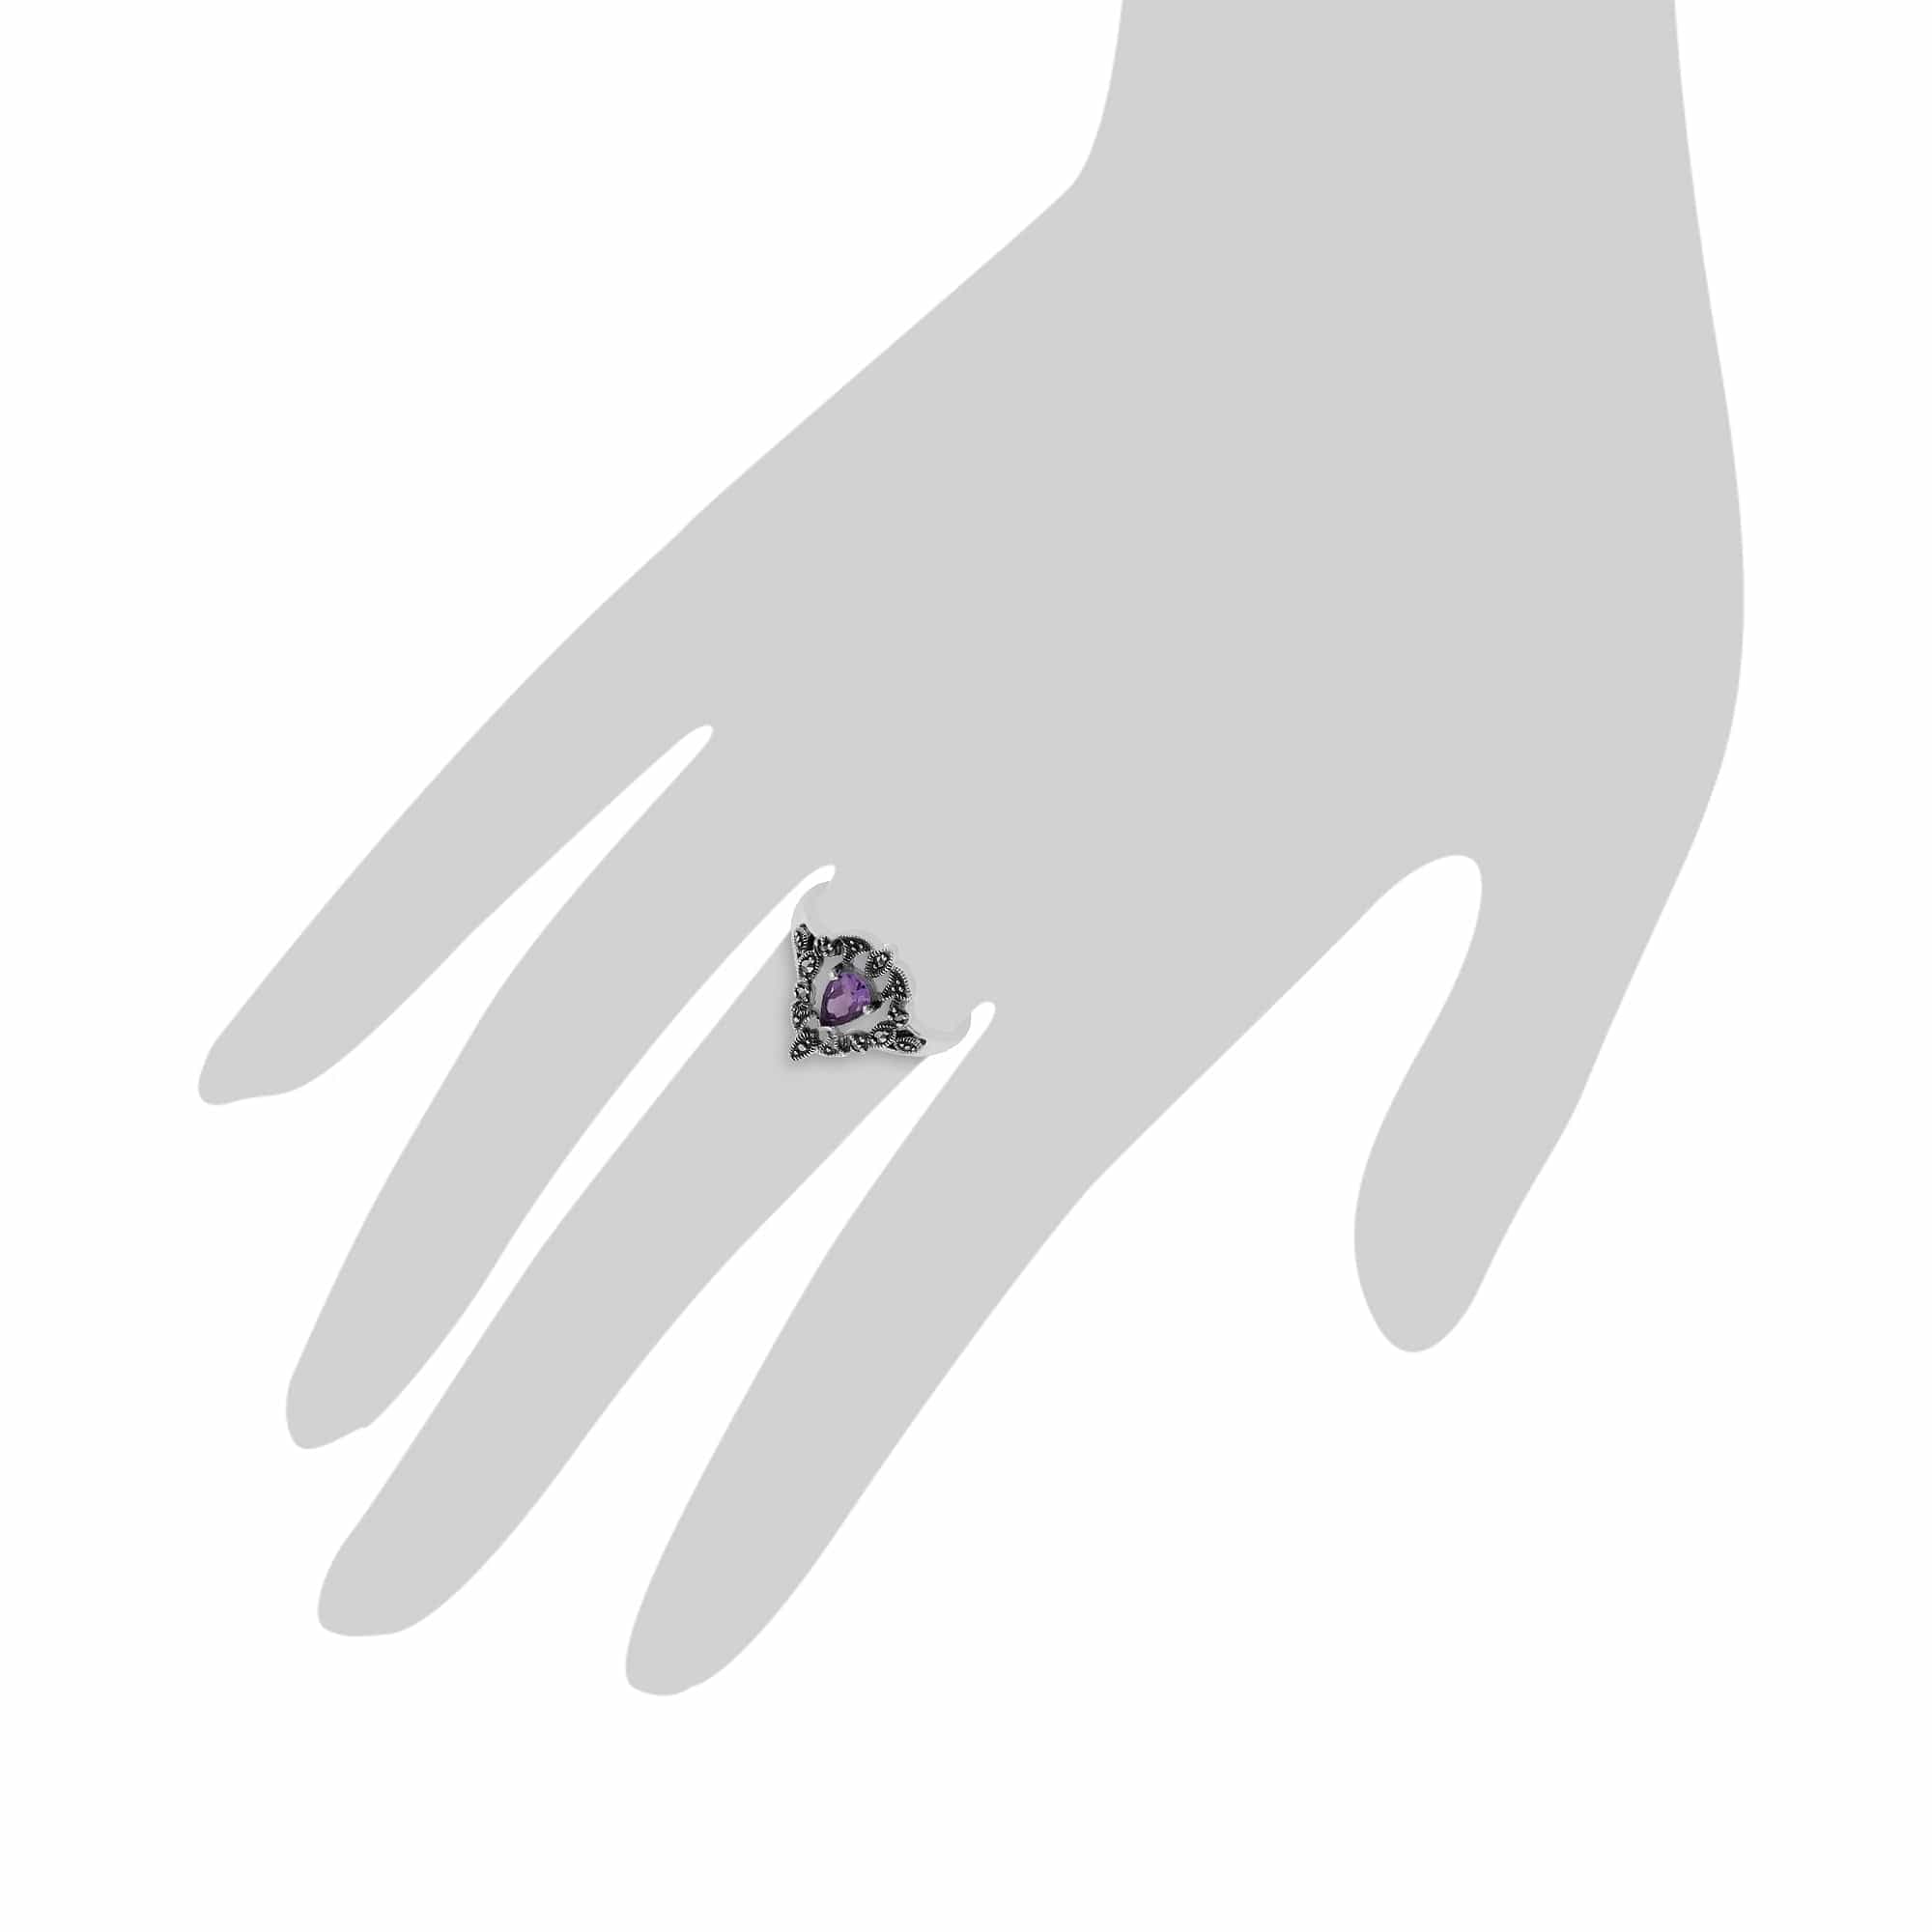 214R507802925 Art Nouveau Style Pear Amethyst & Marcasite Statement Ring in 925 Sterling Silver 3